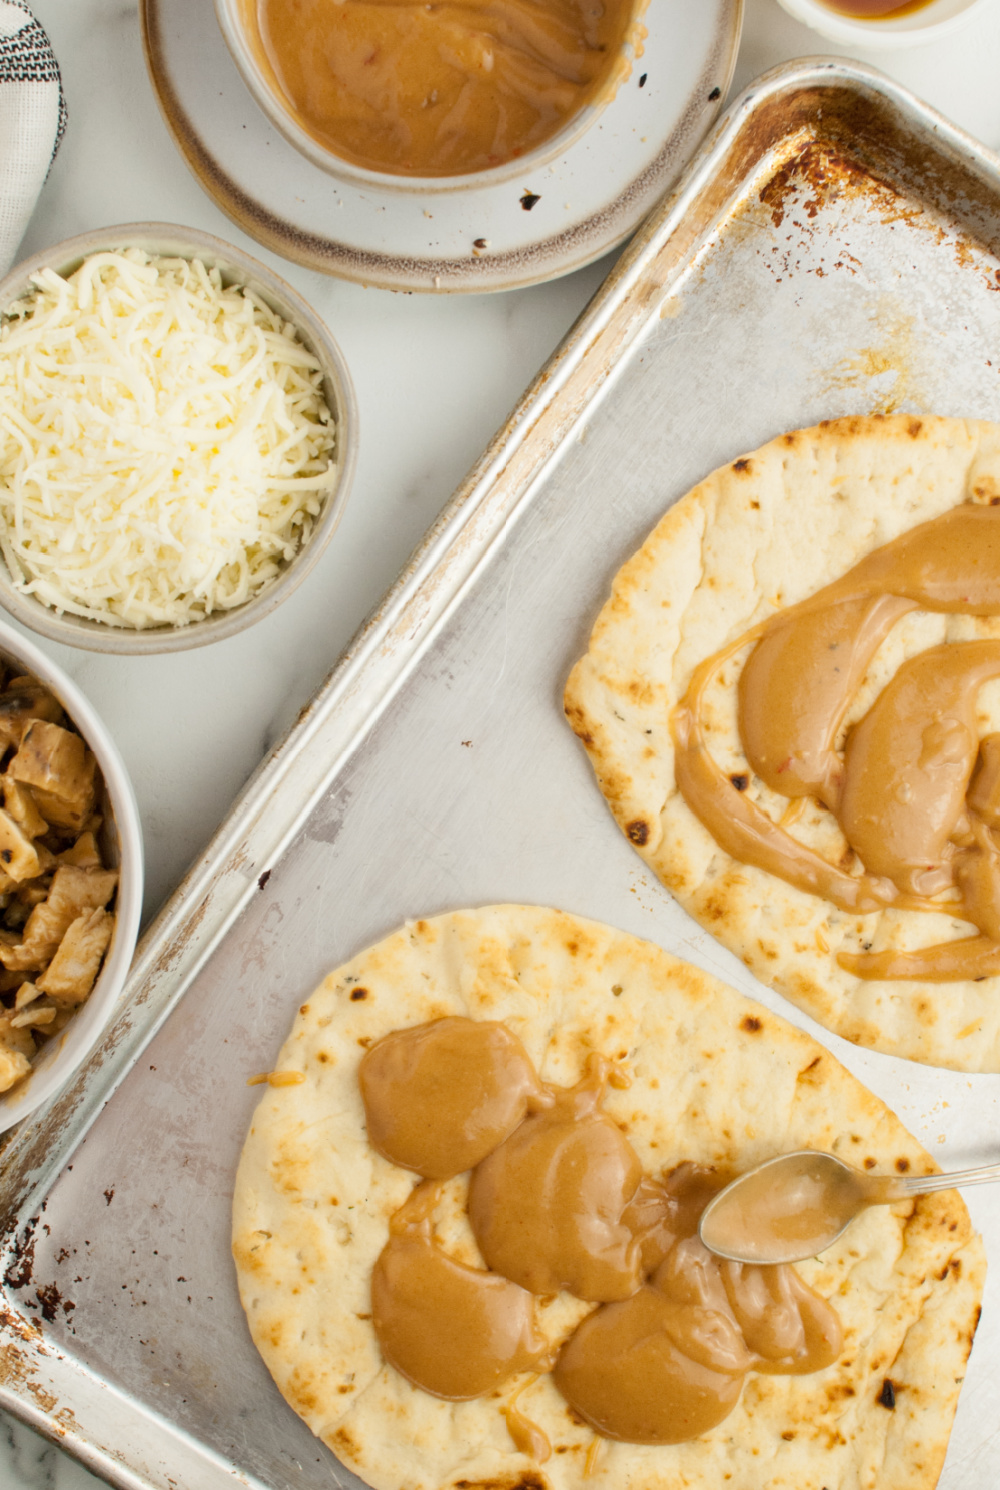 Thai Peanut Chicken Flatbread Recipe, easy college student recipe, bold and delicious flavors like roasted peanuts, tender chicken, and a sweet/spicy sauce